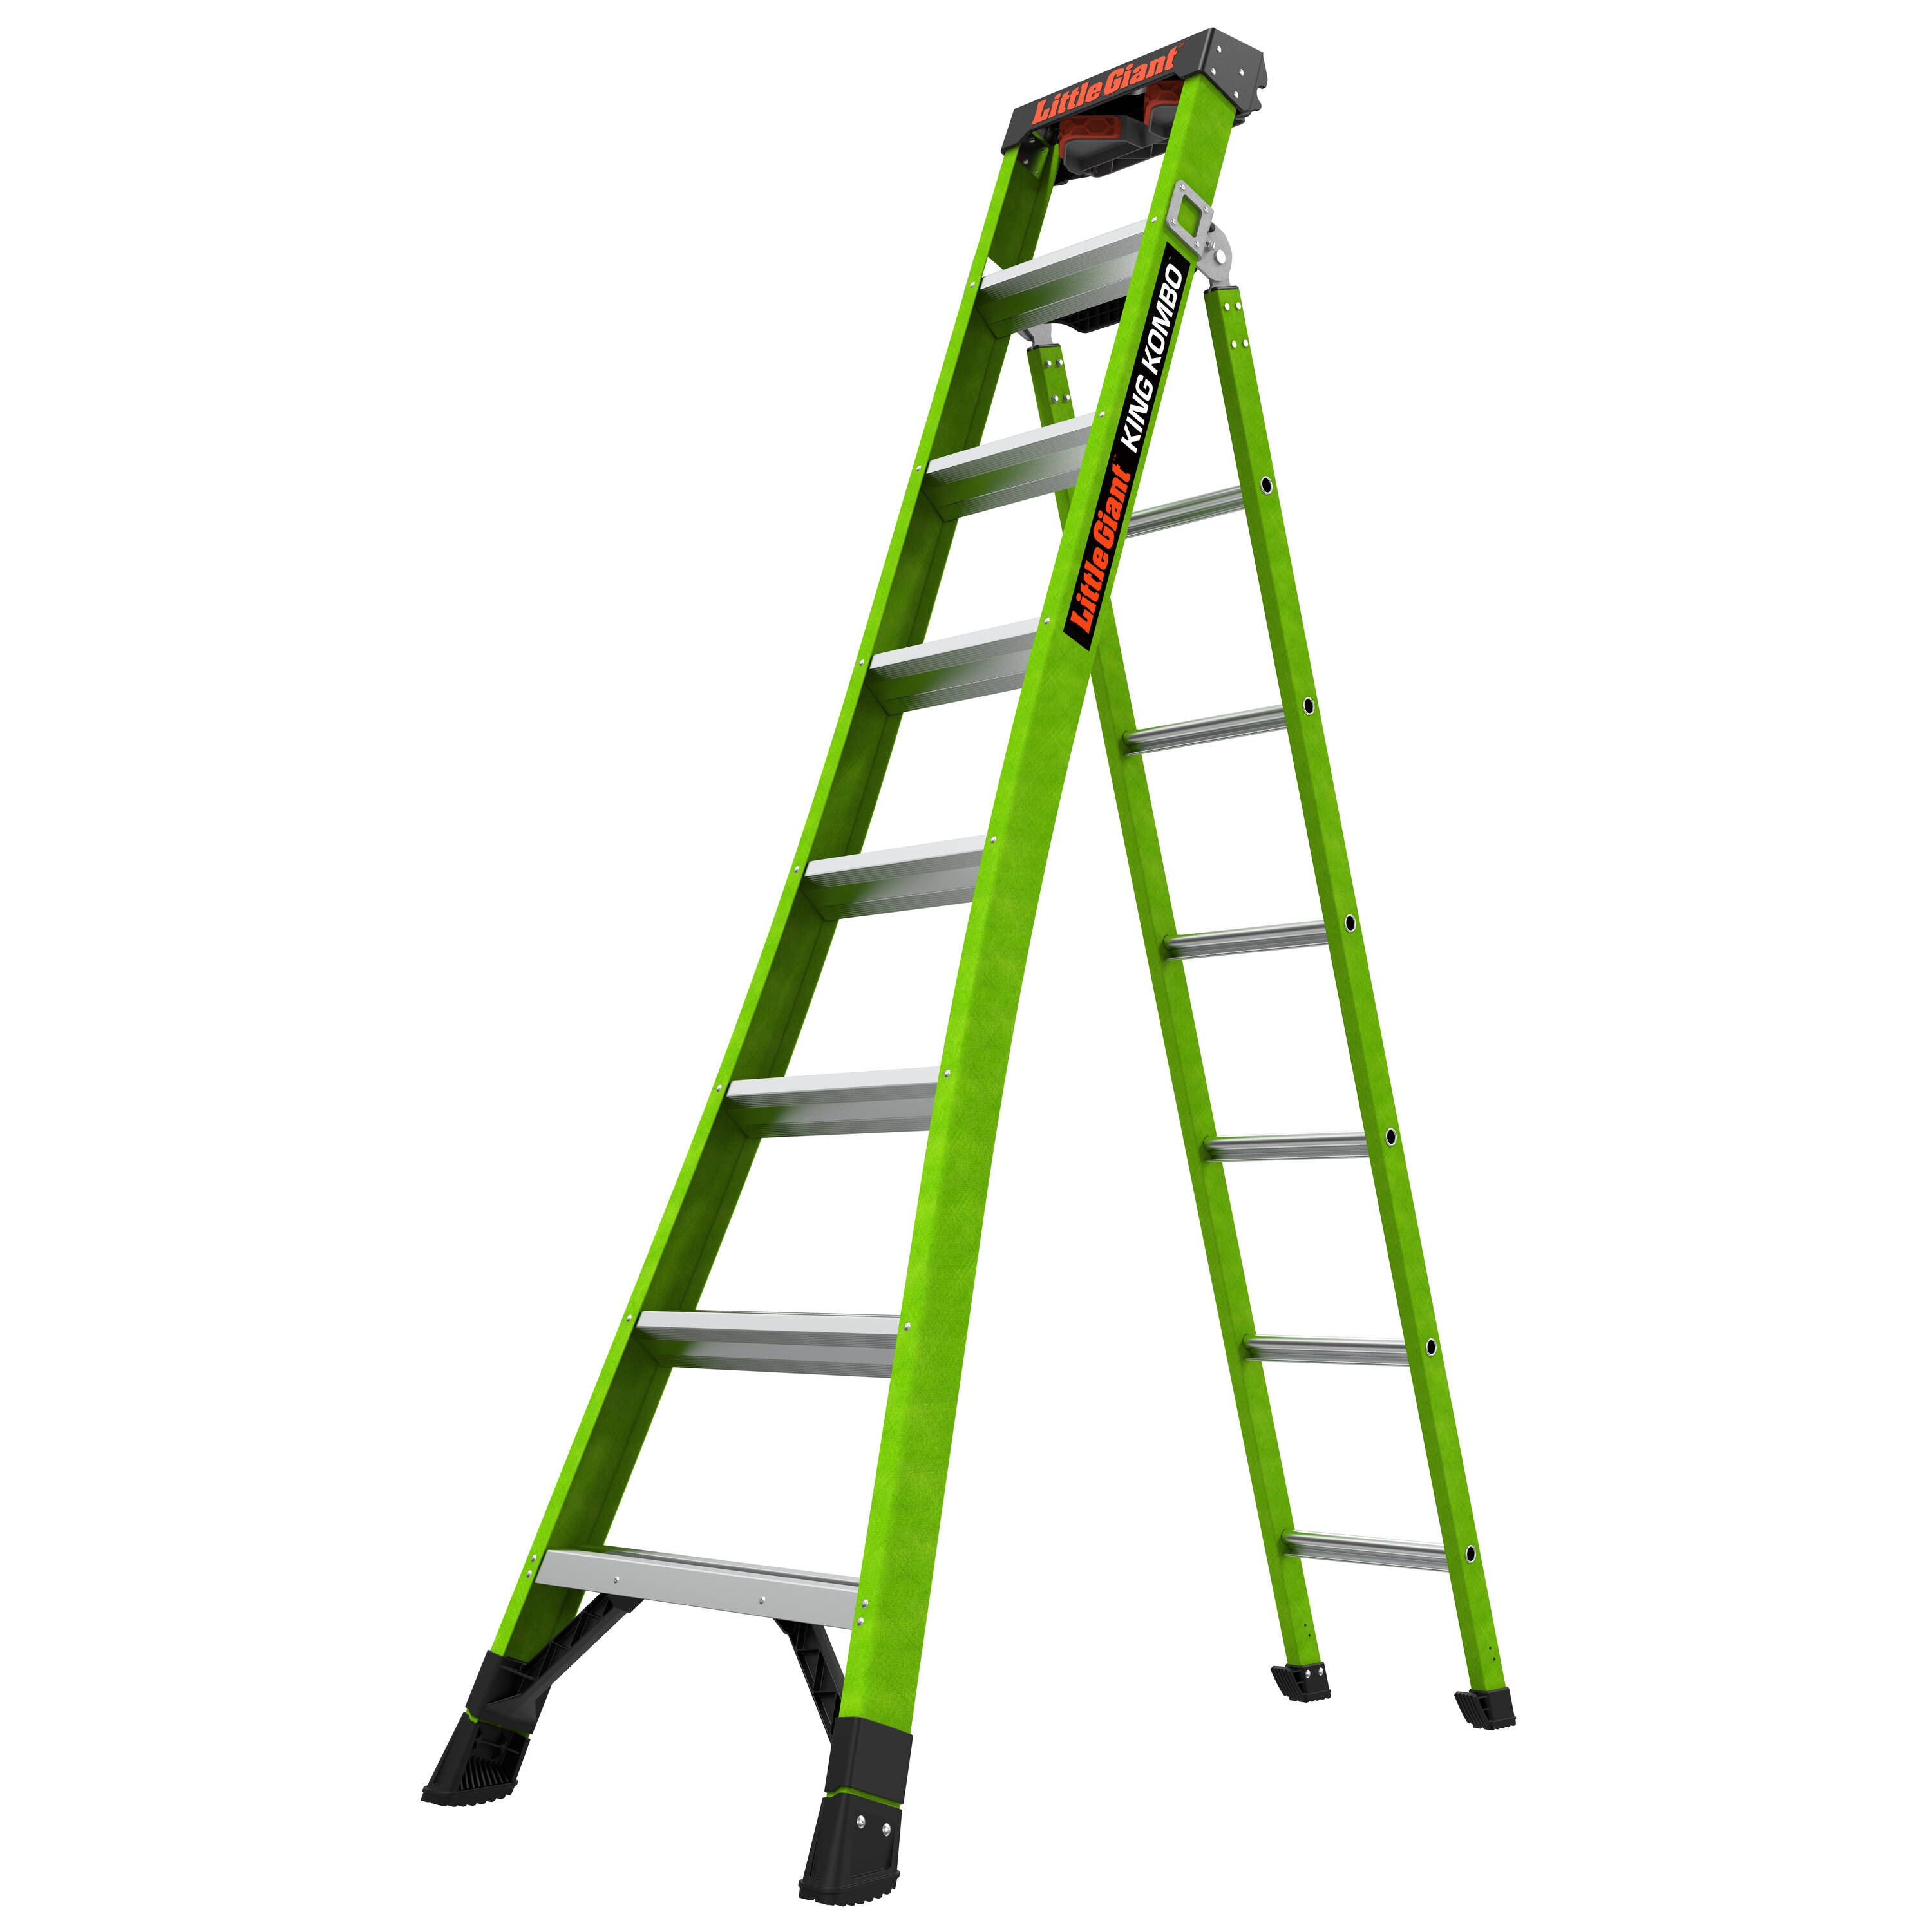 28 Inch Wide Ladders & Scaffolding at